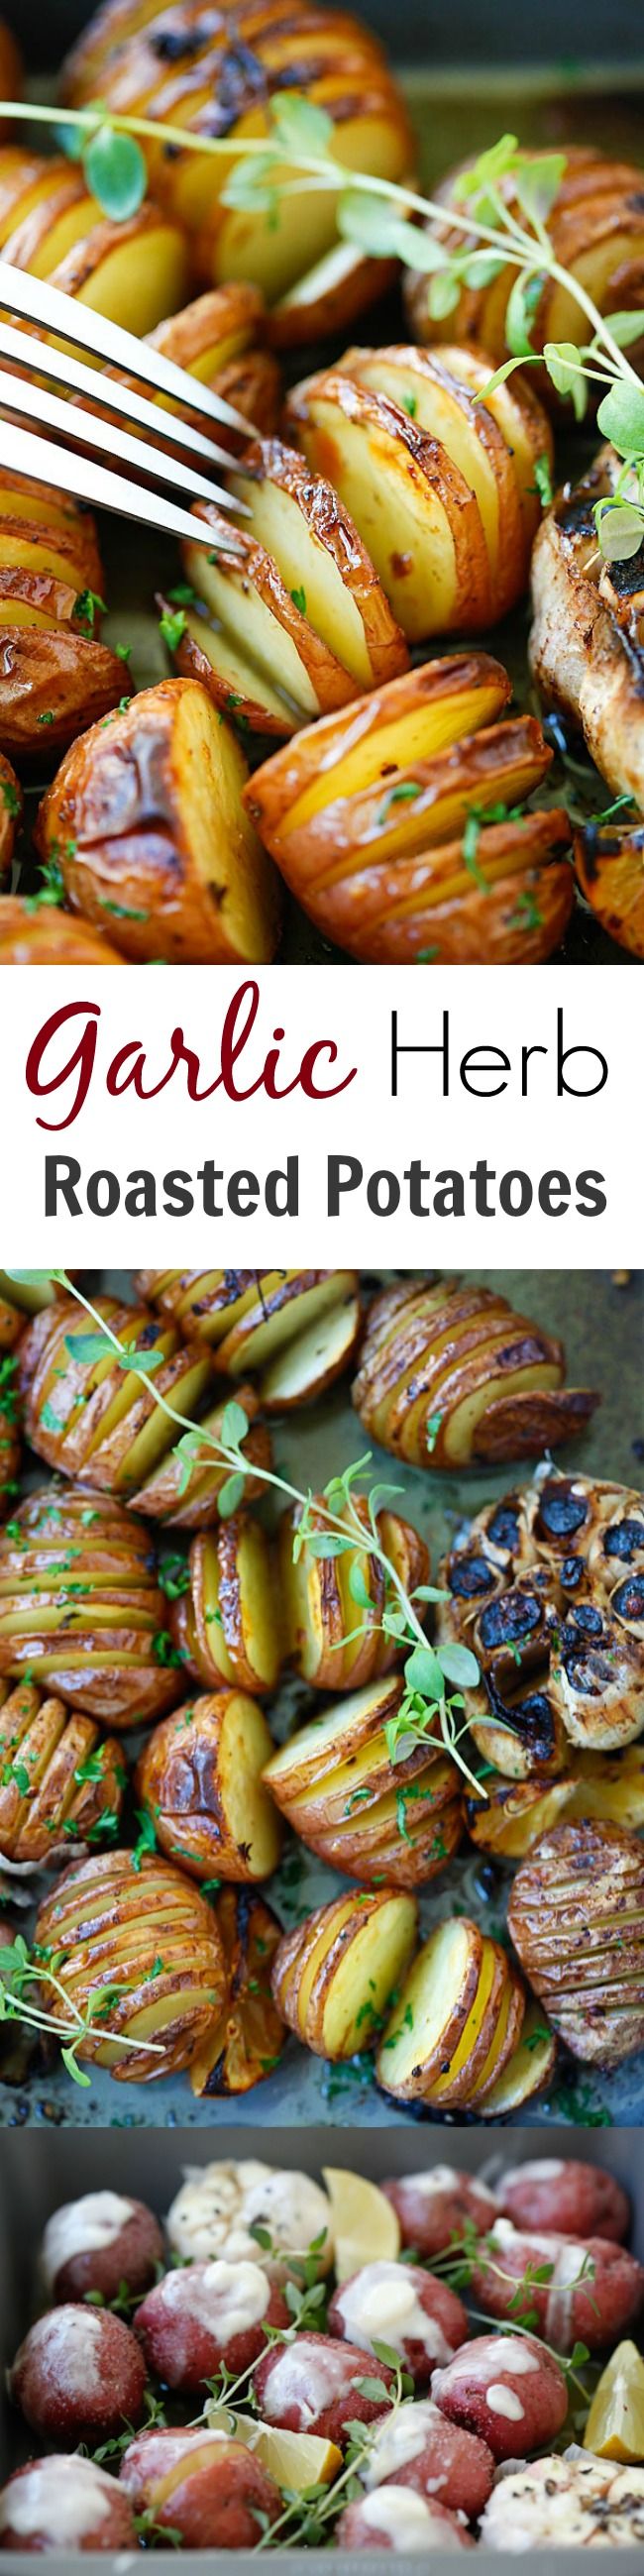 Garlic Herb Roasted Potatoes - baked garlic potatoes with herb, olive oil butter and lemon. The best homemade roasted potatoes recipe ever | rasamalaysia.com